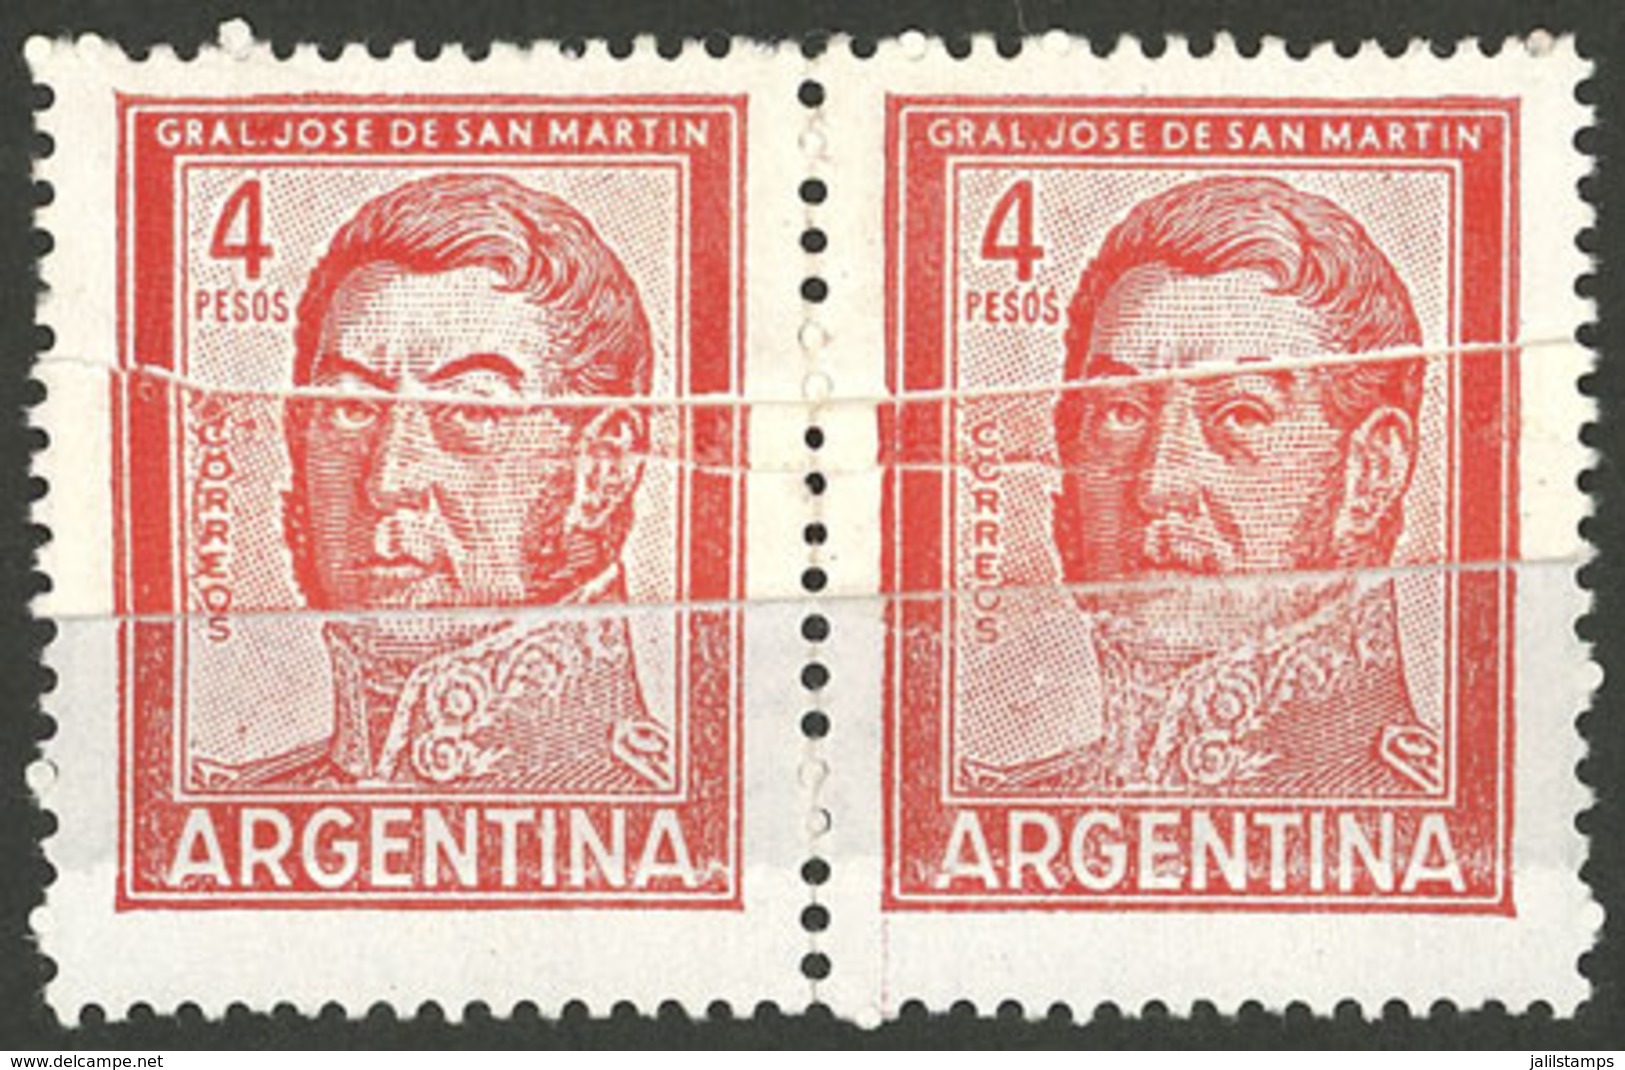 ARGENTINA: GJ.1139A, Pair With Spectacular END-OF-ROLL DOUBLE PAPER, VF Quality! - Ongebruikt